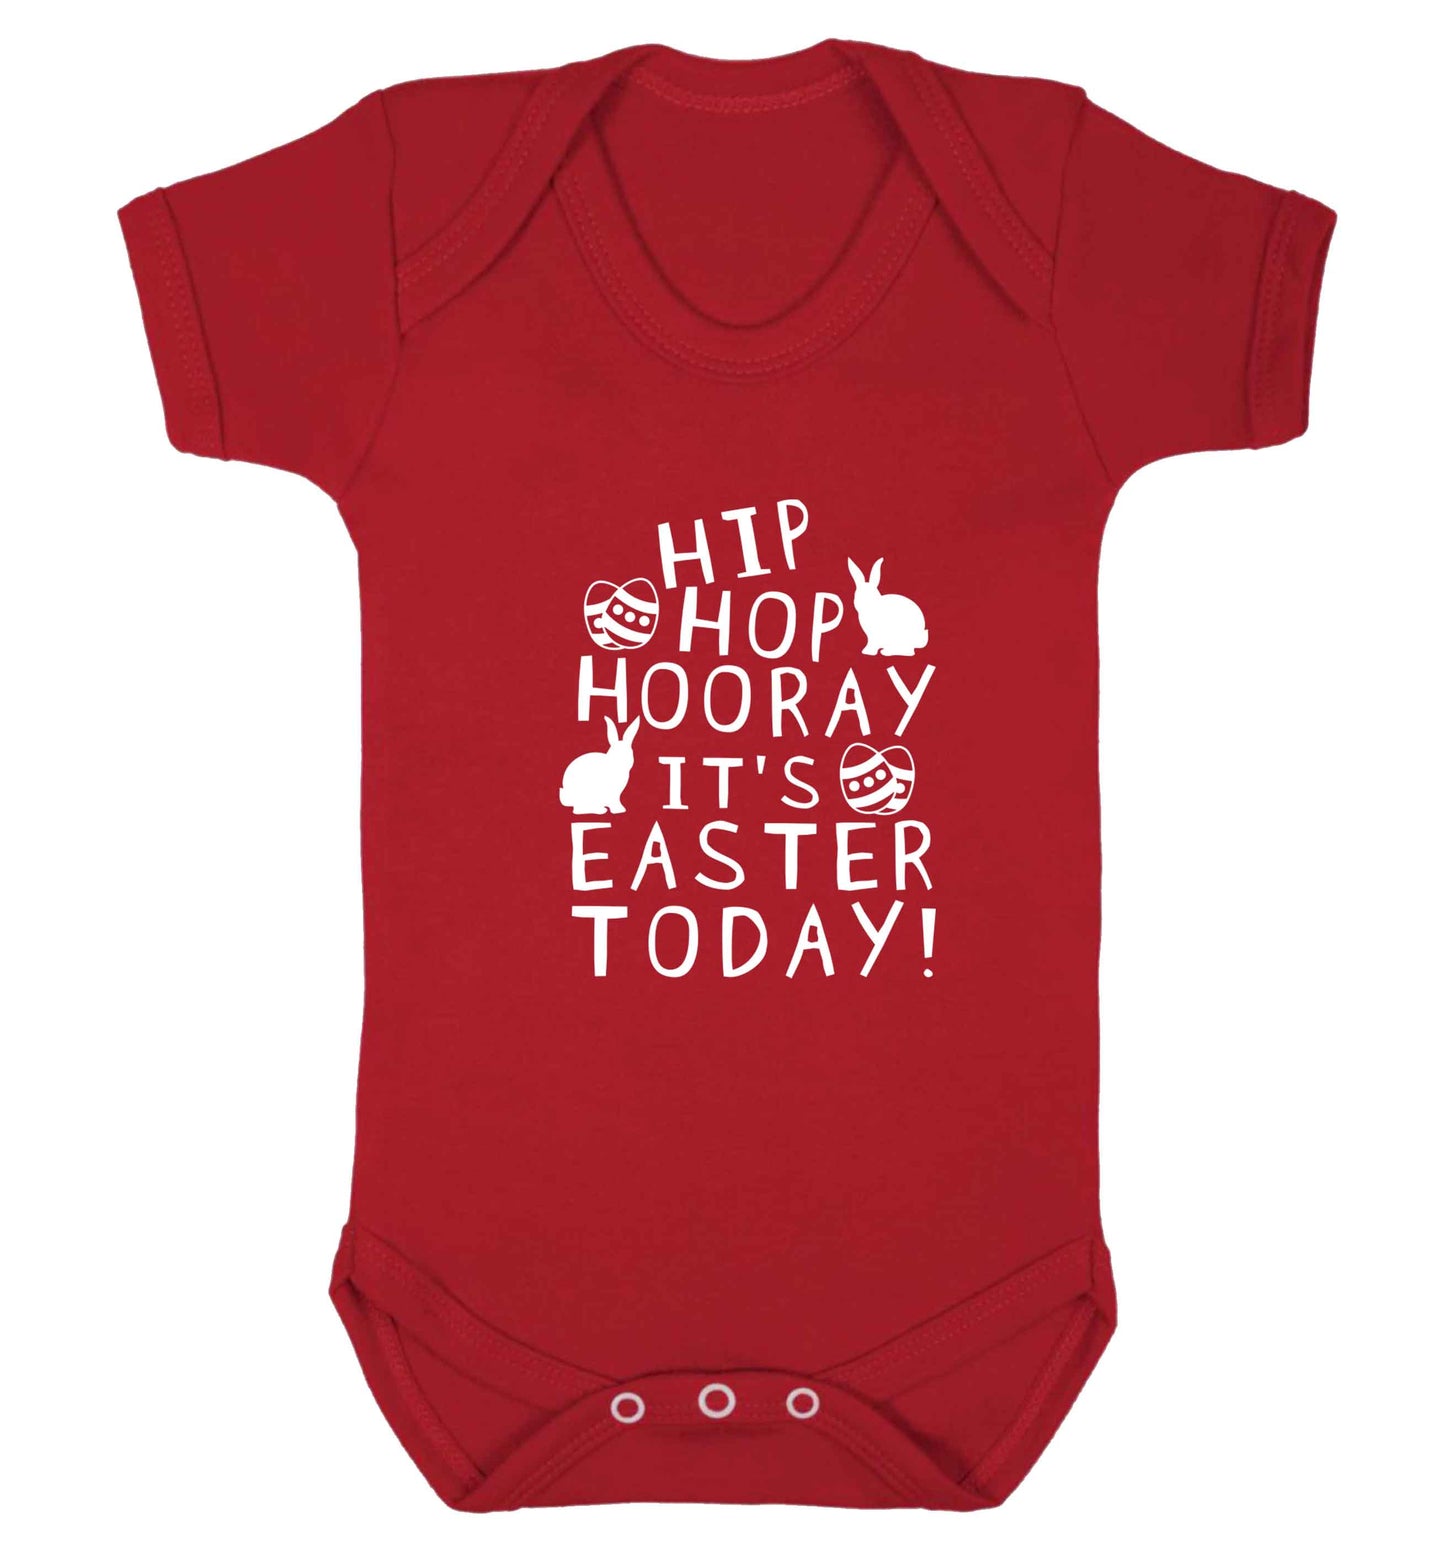 Hip hip hooray it's Easter today! baby vest red 18-24 months